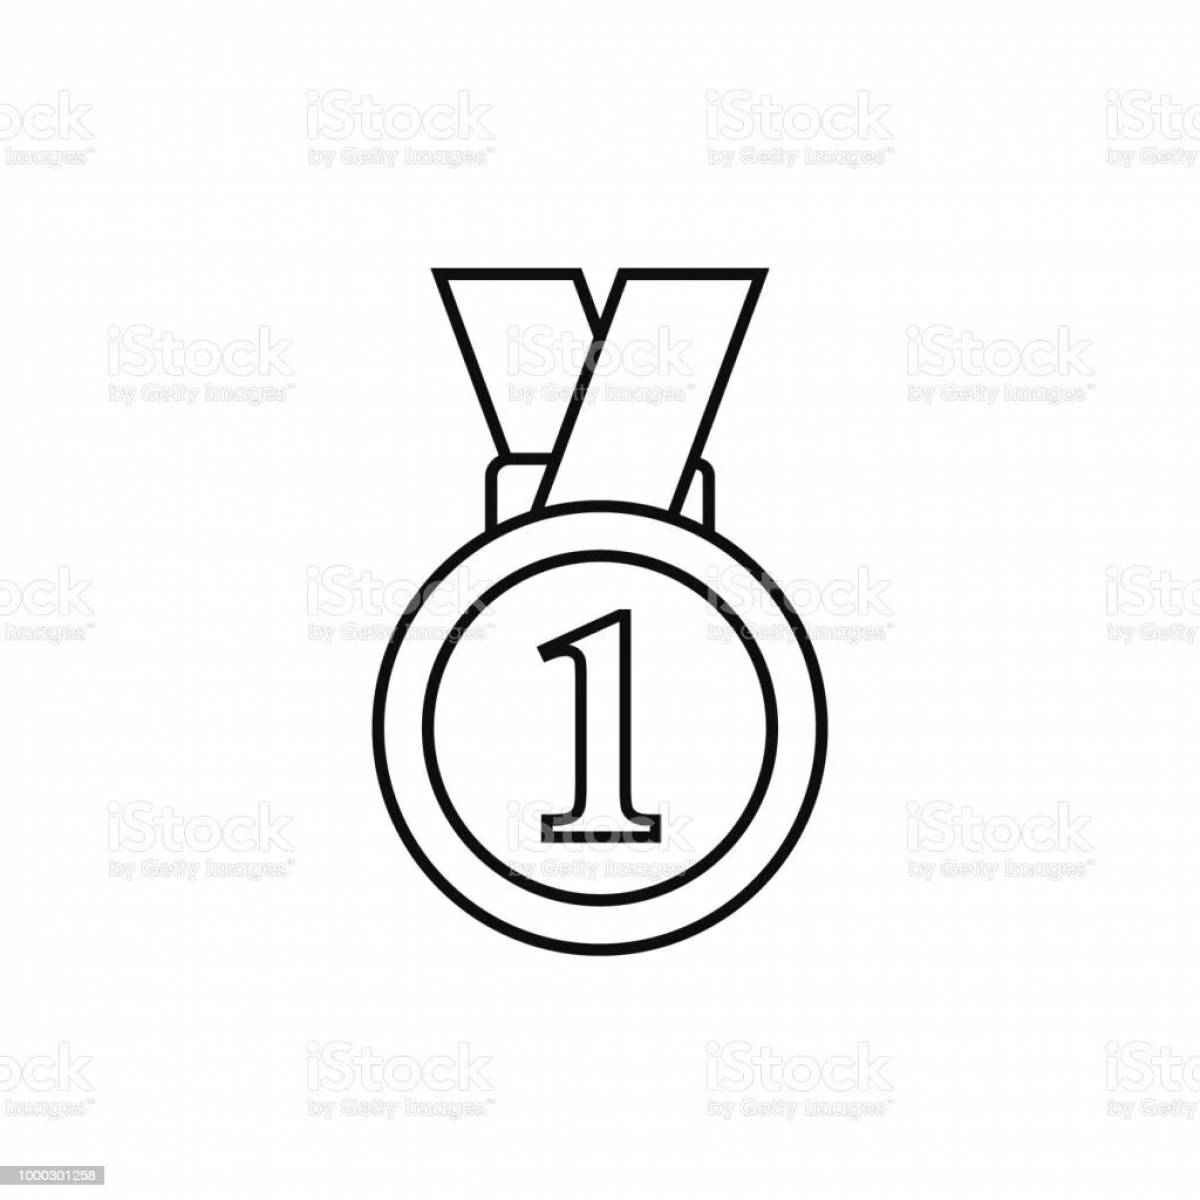 1st place medal coloring page with colorful engraving